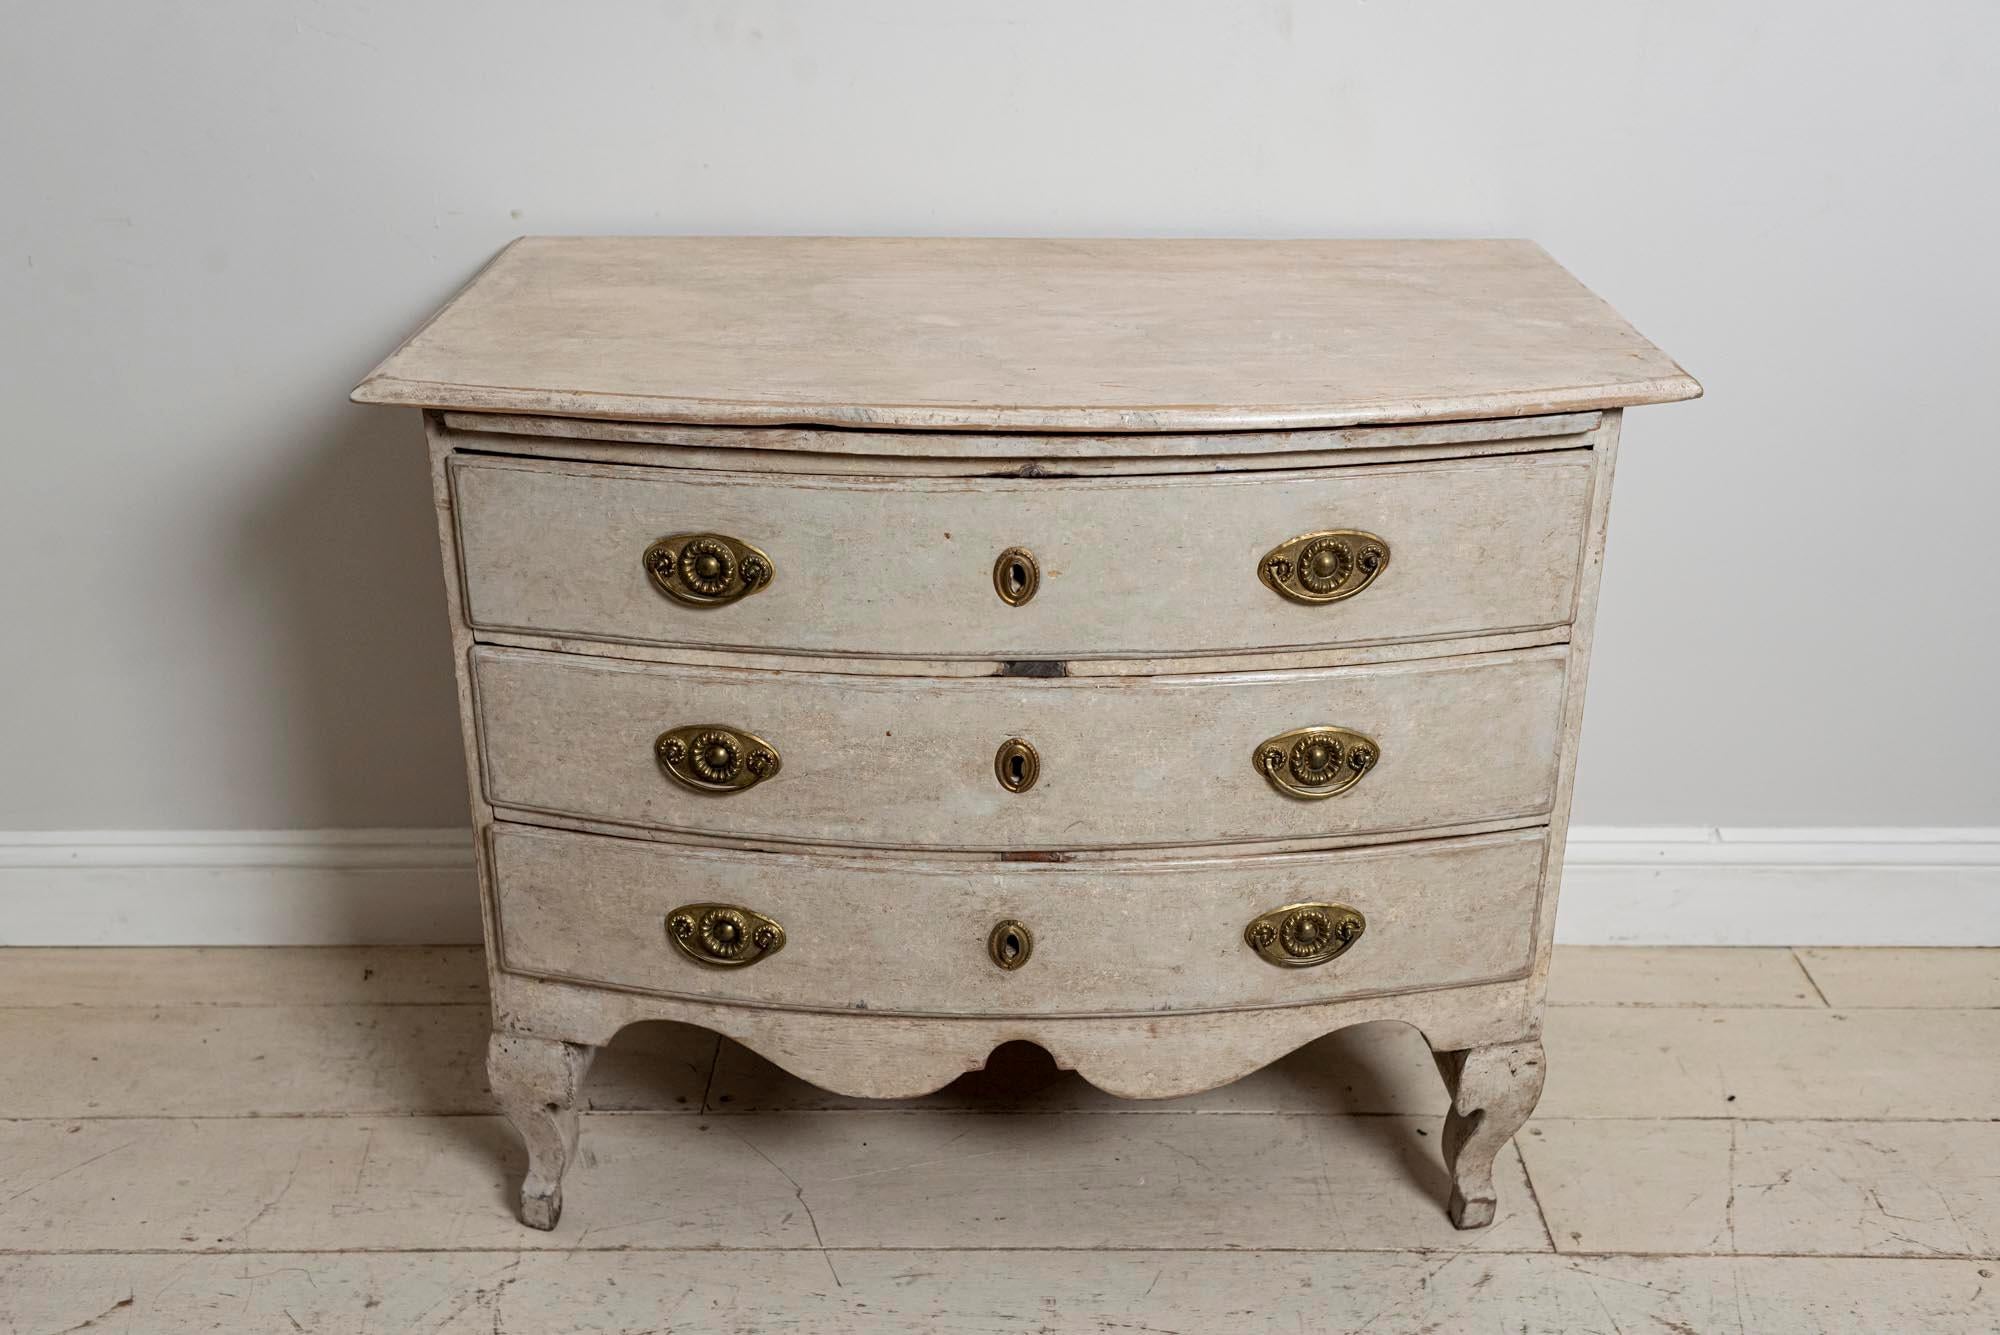 Late 18th century painted Swedish commode. A nicely proportioned piece which has three drawers and a useful sliding shelf at the top. The commode has some old metal repairs to the front which we think adds additional character to the piece.

The